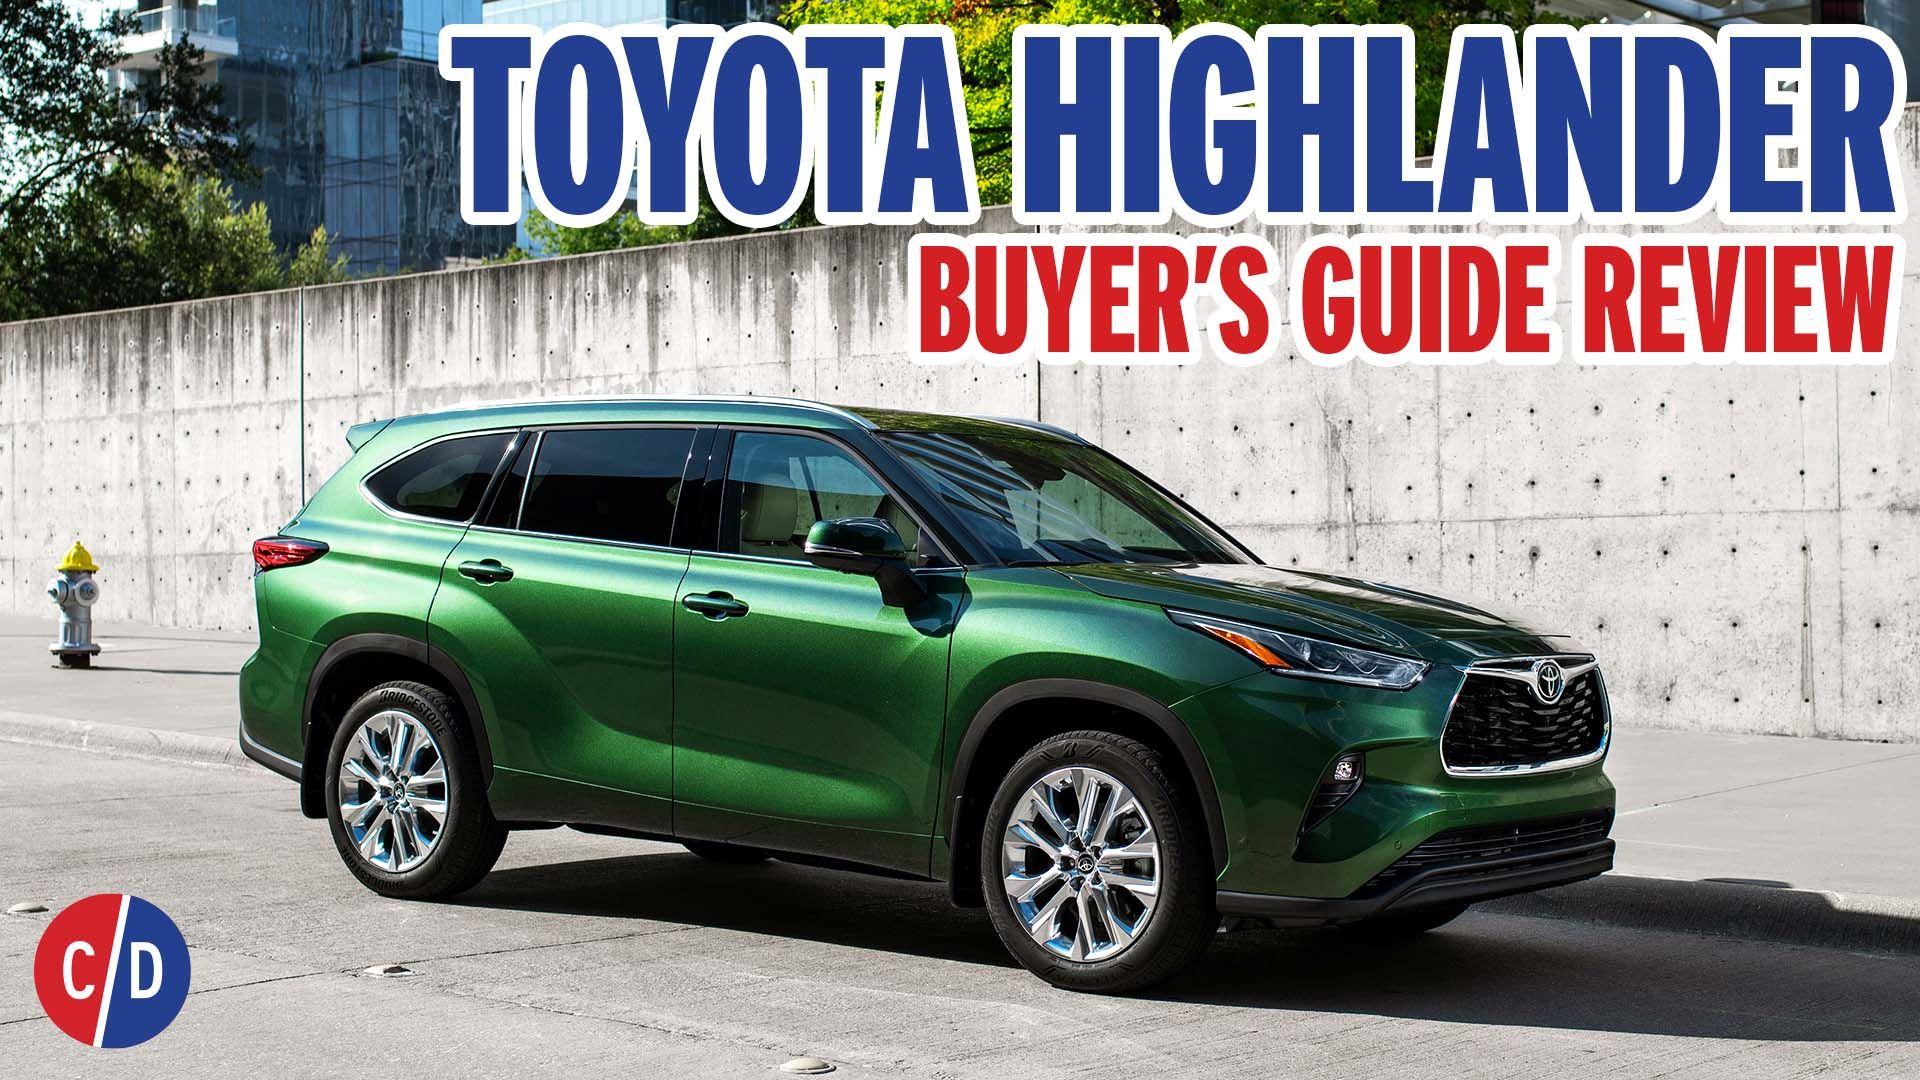 Introducing the all-new Toyota Highlander